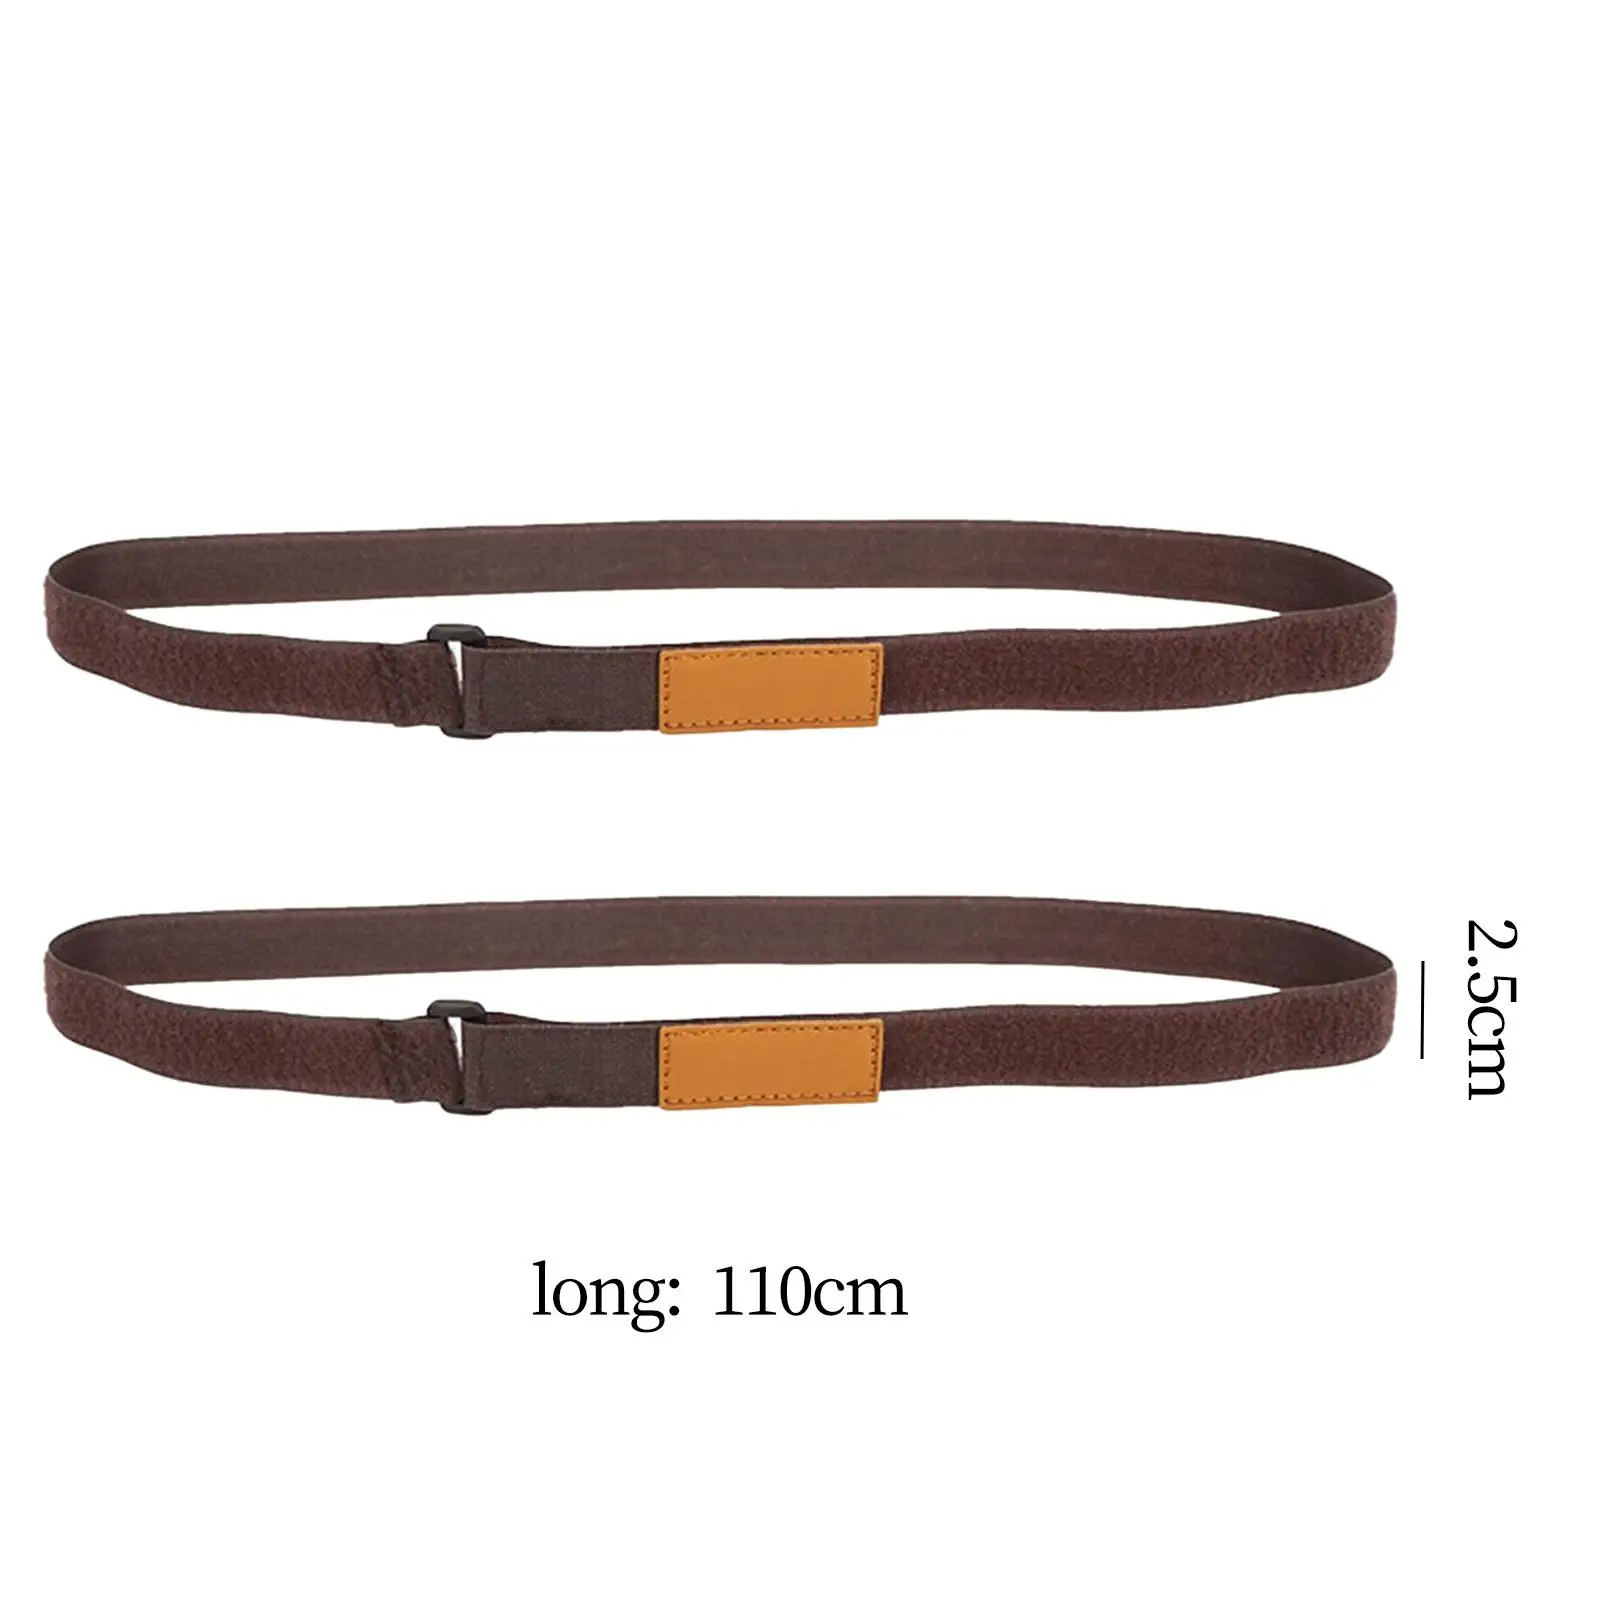 2Pcs Cargo Straps Tie Down Belt Lashing Strap Fixing Portable Tensioner Durable for Luggage Roof Rack Carrier Traveling Baggage